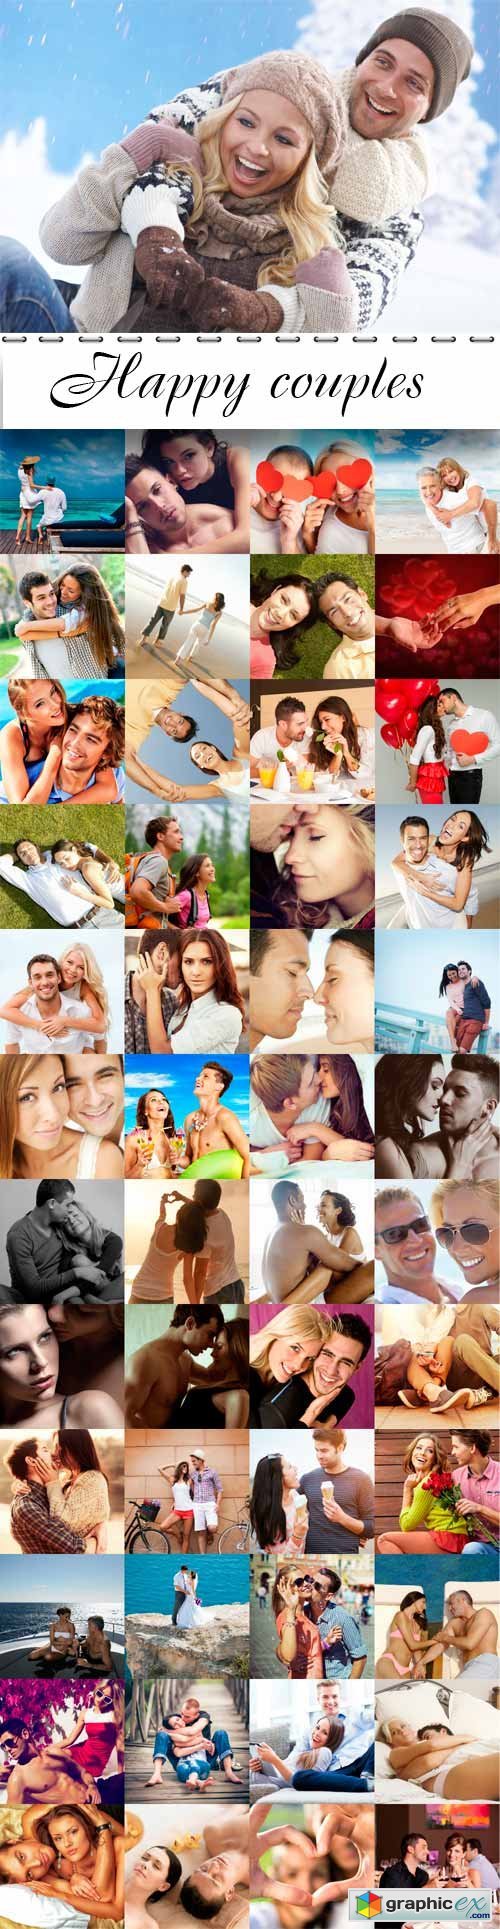 Happy couples raster graphics collection